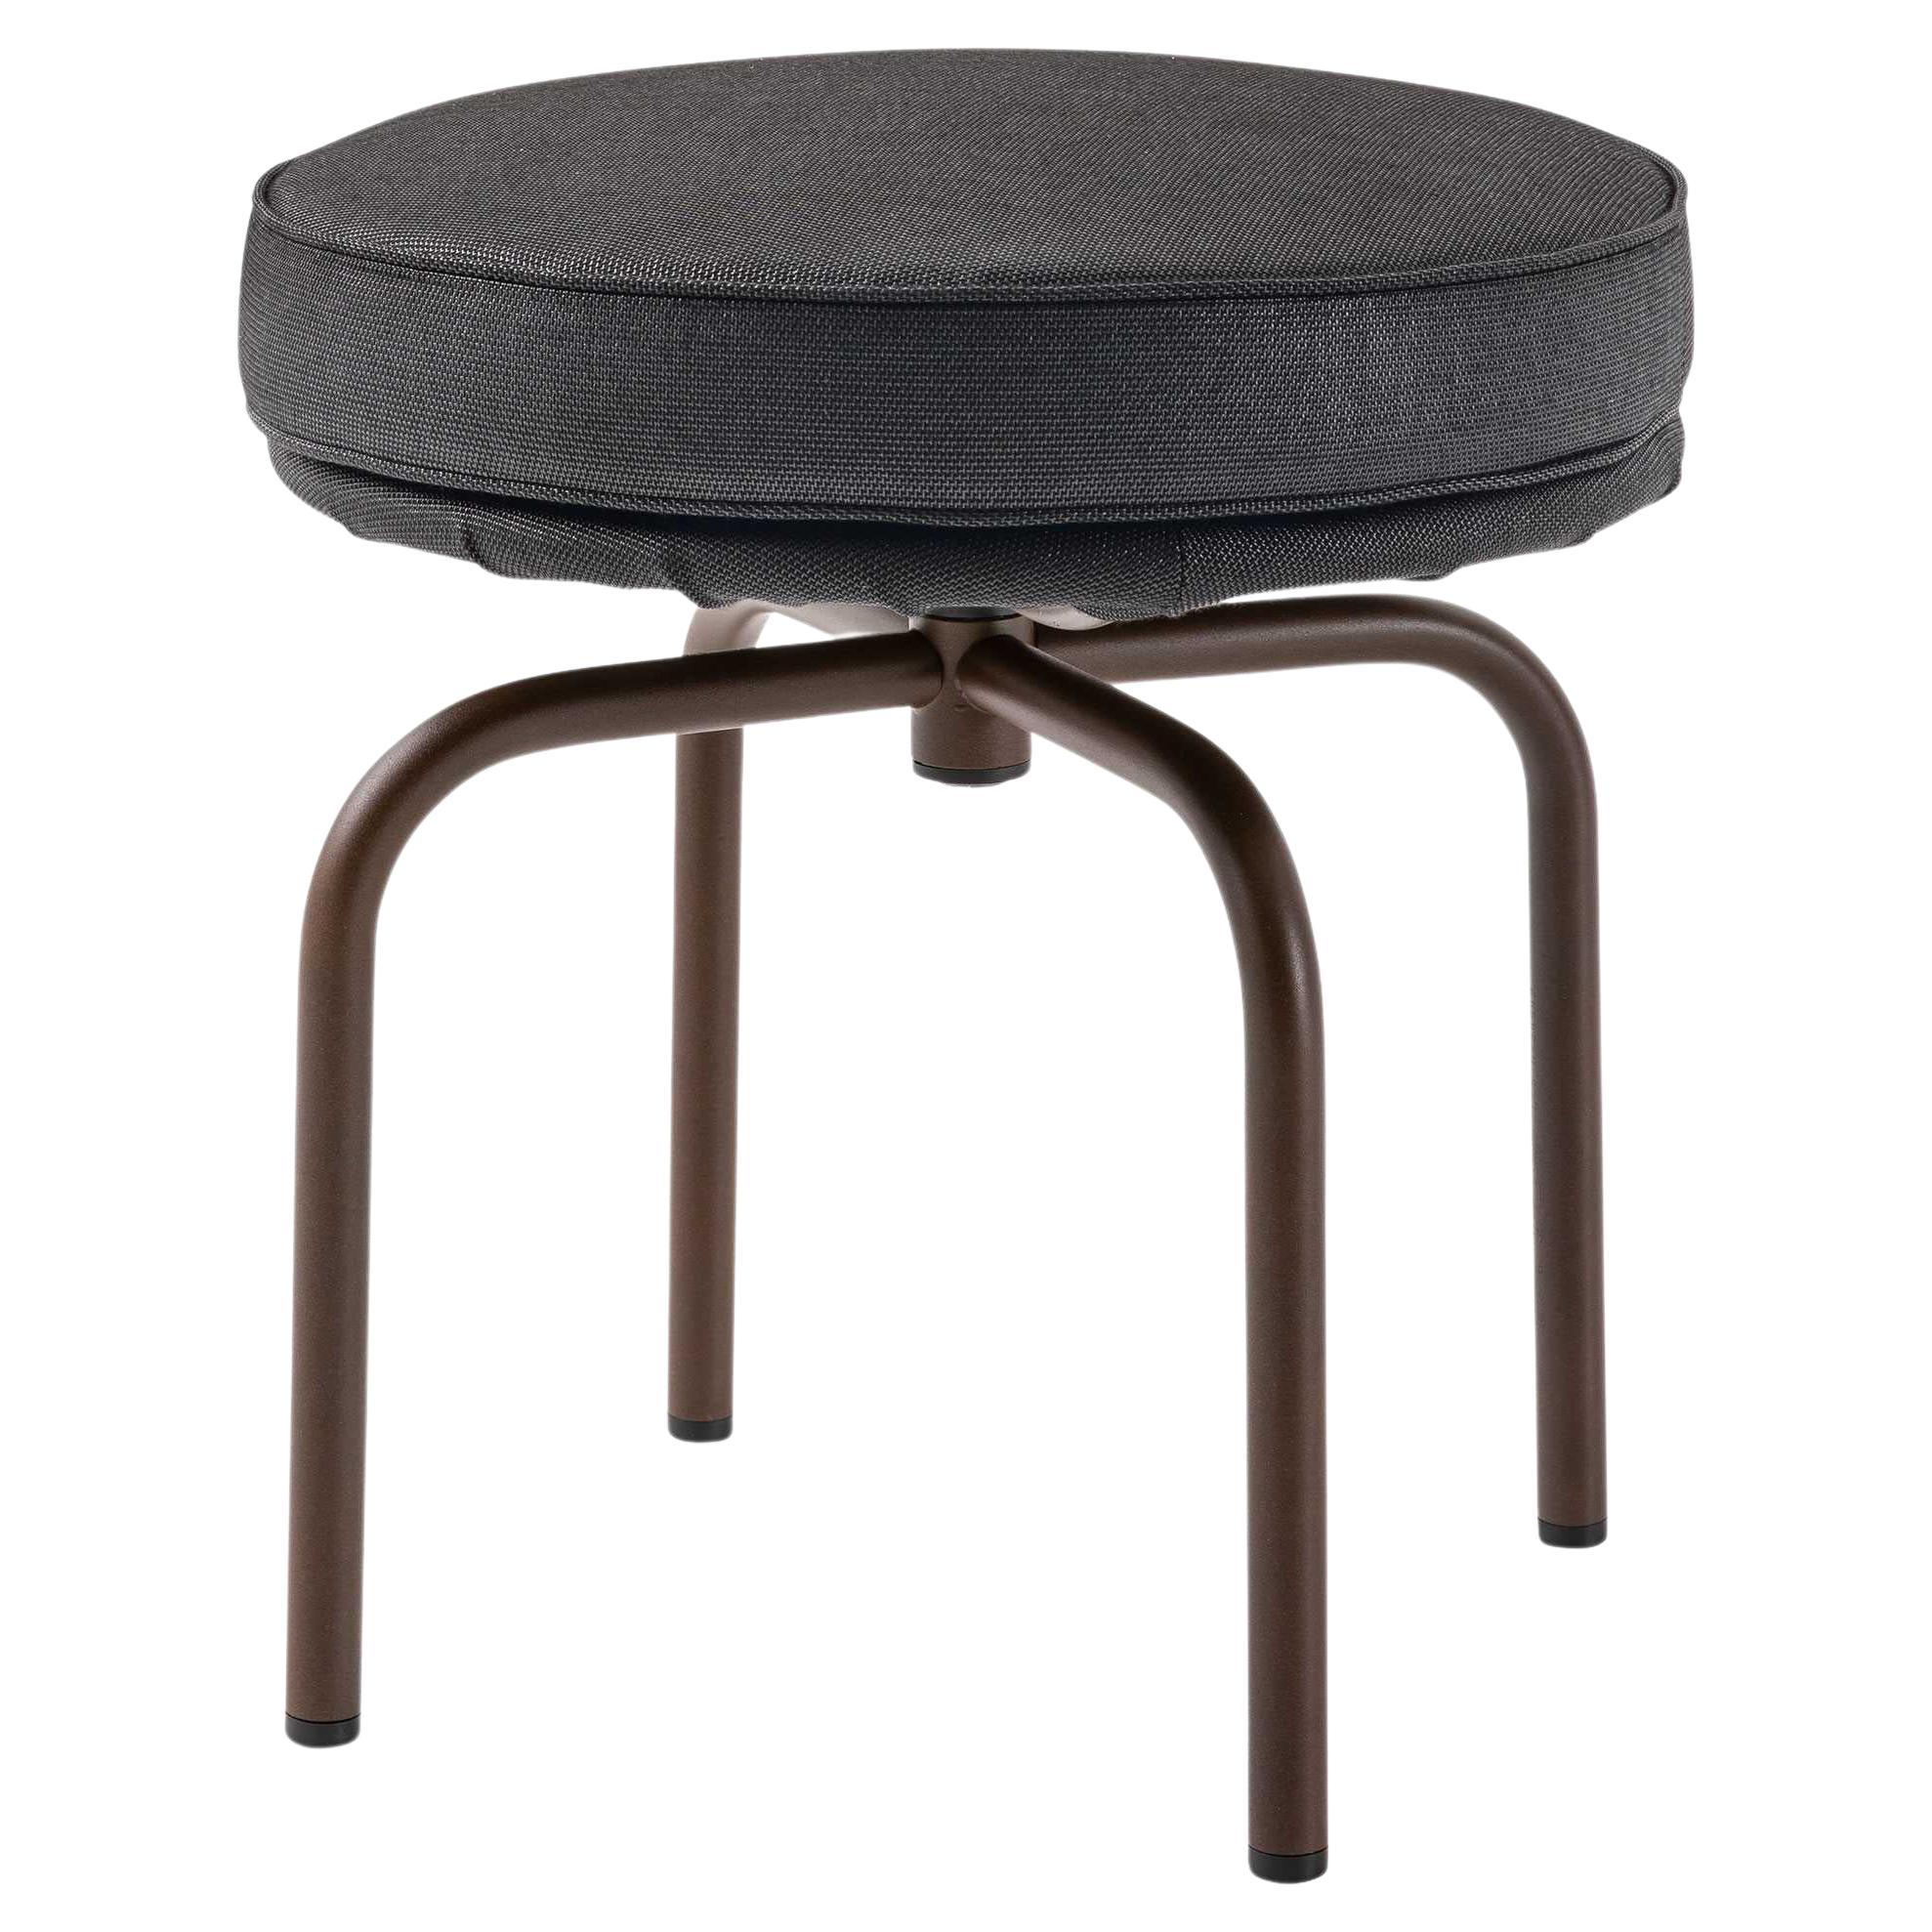 Charlotte Perriand LC8 Outdoors Stool by Cassina